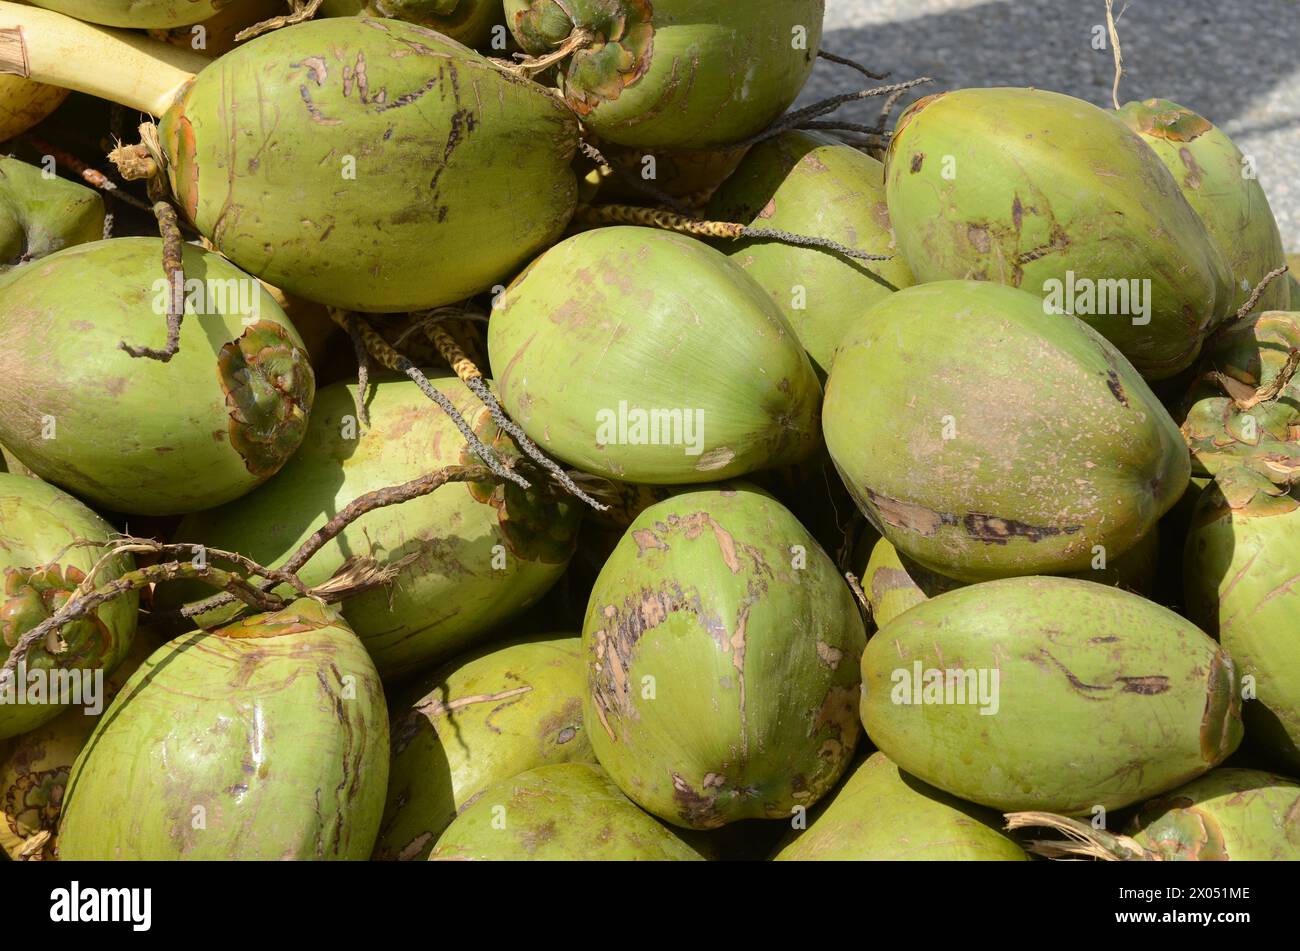 A pile of green coconuts with brown spots on them. The coconuts are piled on top of each other Stock Photo